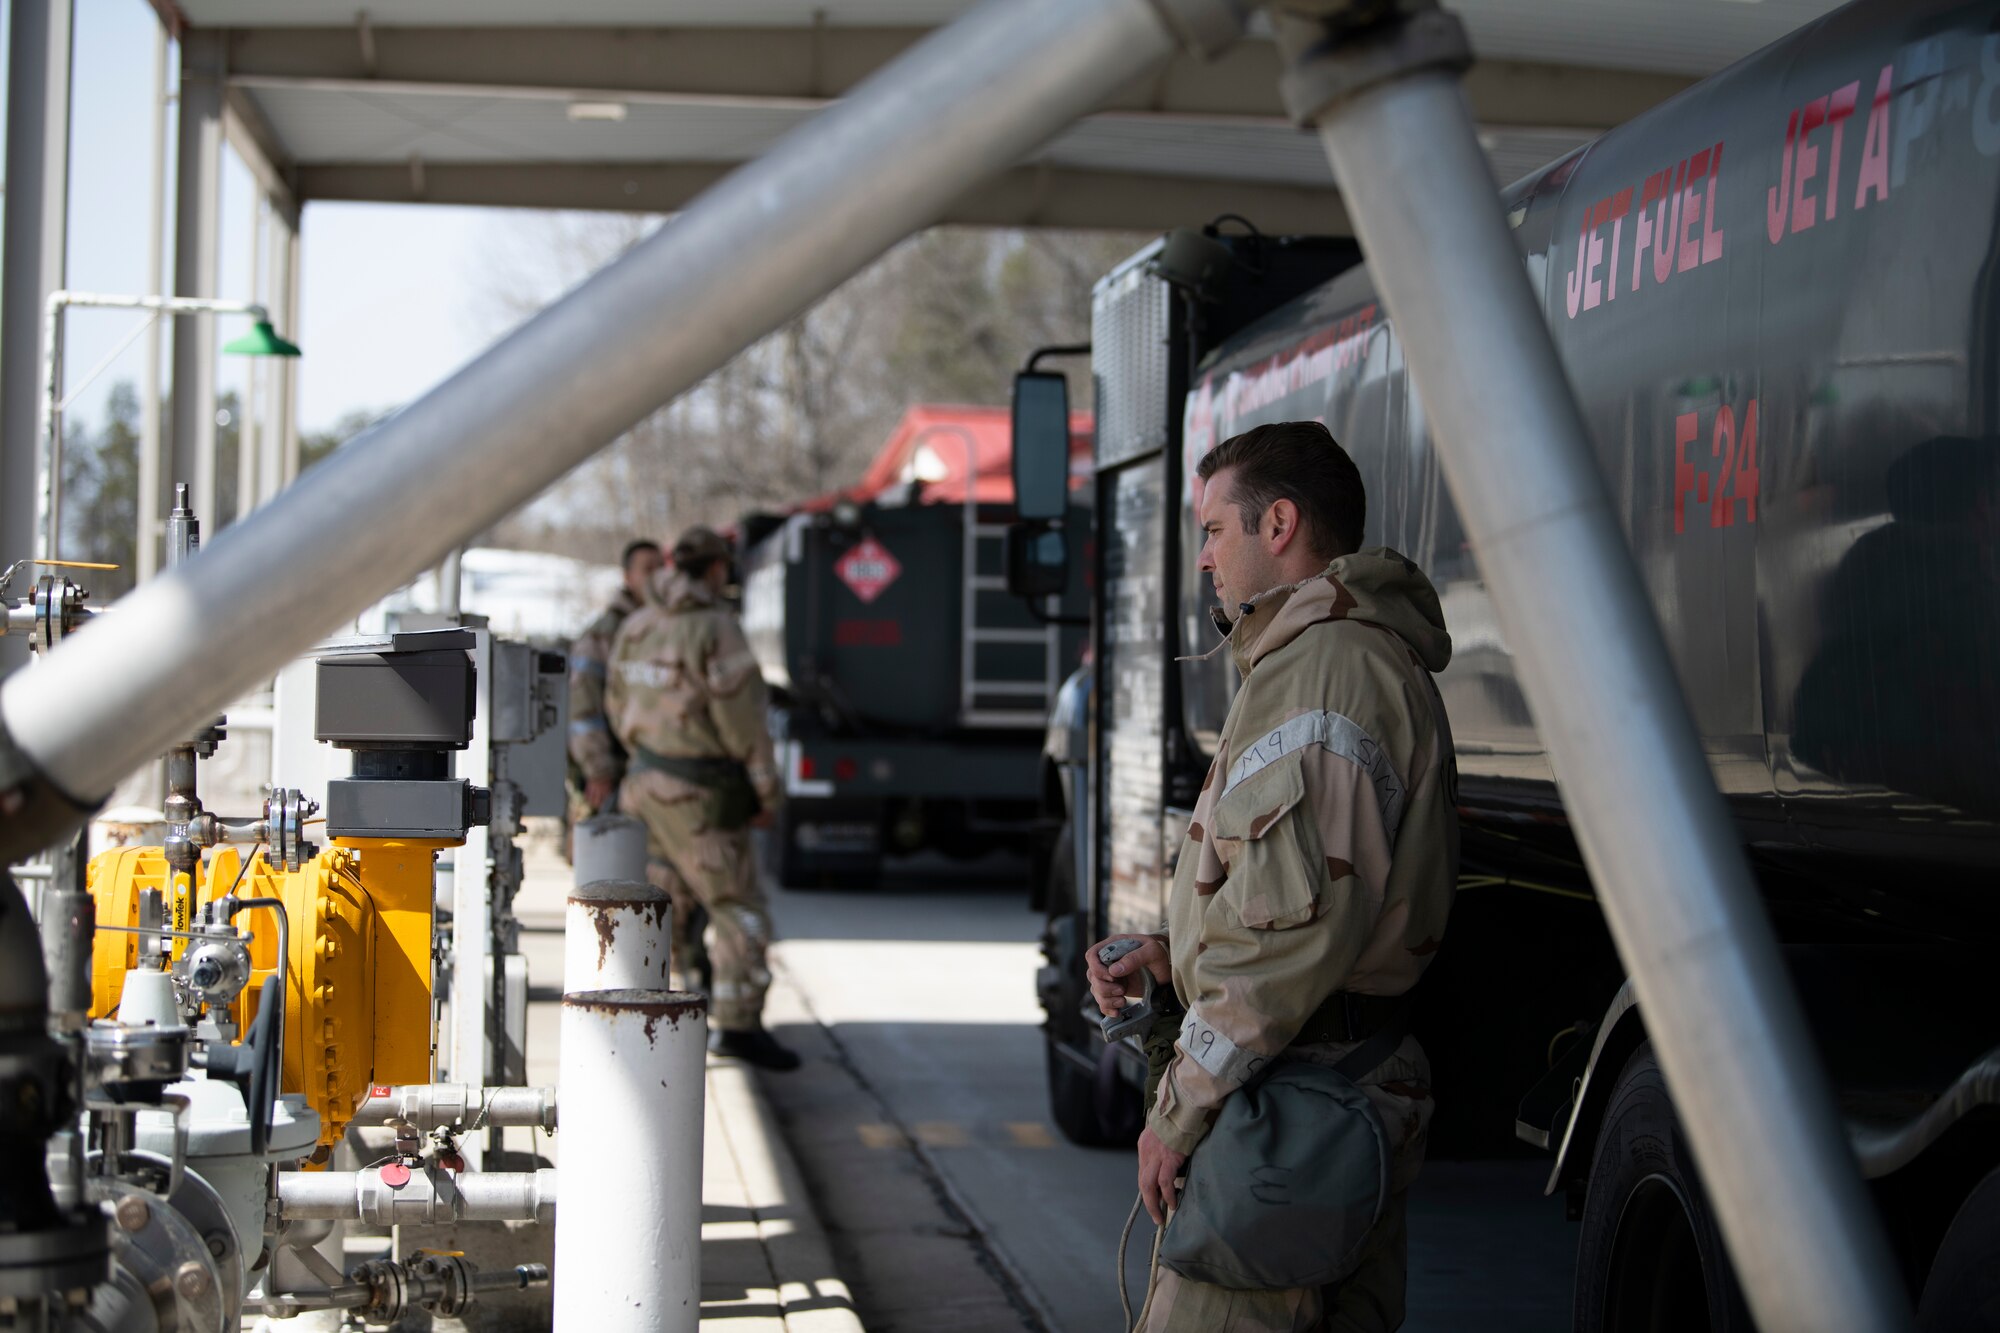 U.S. Air Force Staff Sgt. Casey Bonillas, 60th Logistics Readiness Squadron ground transportation specialist and non-commissioned officer in charge of equipment support, refuels an R-11 fuel truck while donned with mission-oriented protective postures (MOPP) gear at the Alpena Combat Readiness Training Center, Alpena, Michigan, April 12, 2022. Bonilas is standing next to the back end of the truck and watching a gauge as he refuels the truck.